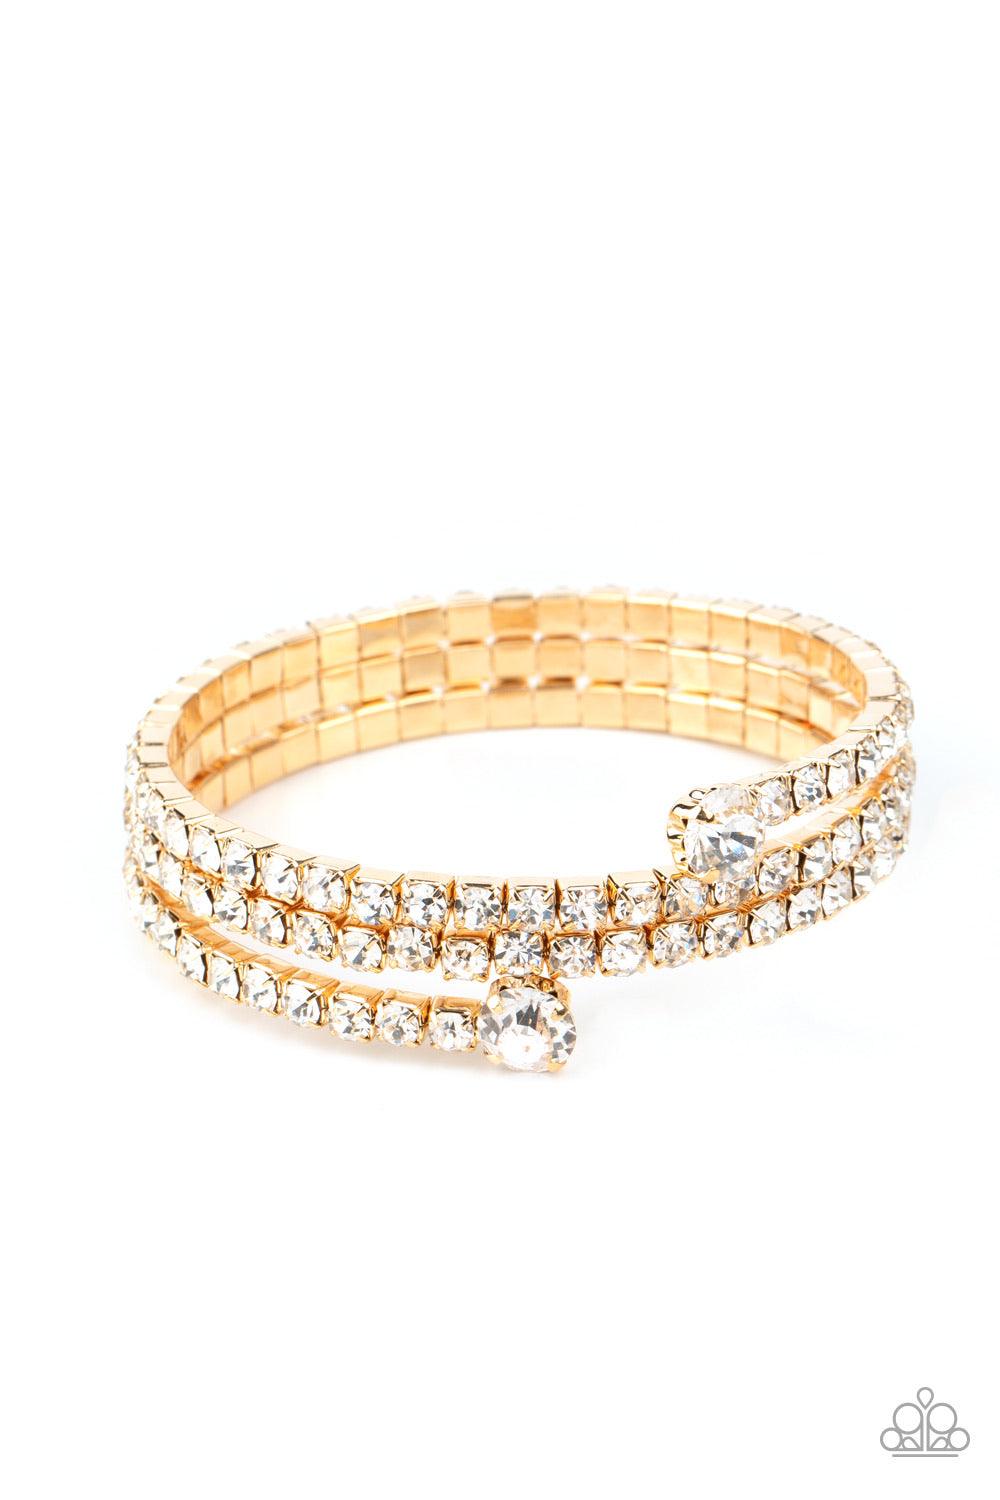 Paparazzi Accessories After Party Princess - Gold Featuring two oversized white rhinestone fittings, a glittery collection of white rhinestone encrusted gold frames are threaded along a gold wire around the wrist, creating a glamorous infinity wrap bracel